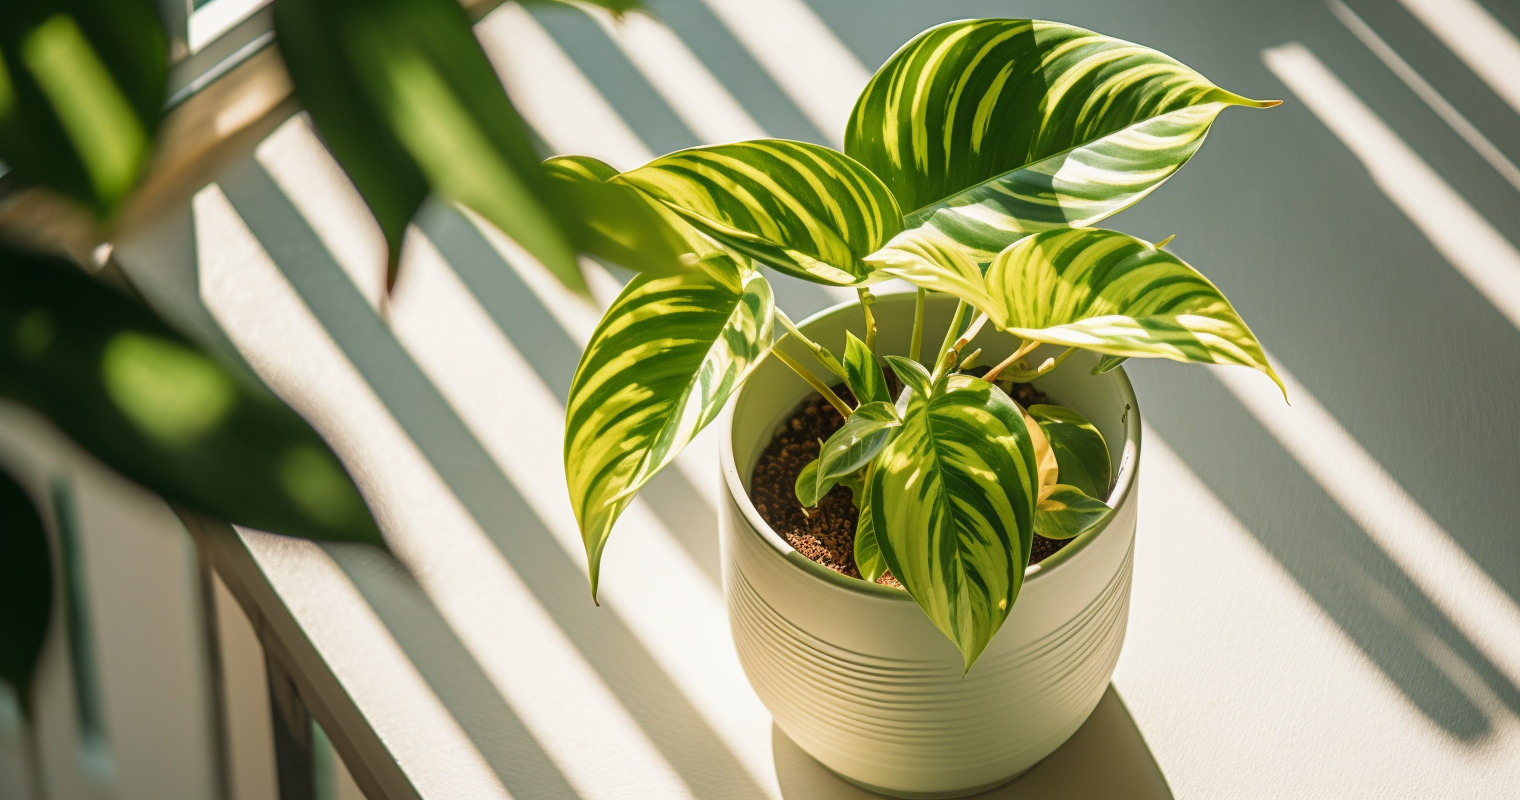 Protecting Houseplants from Sunlight